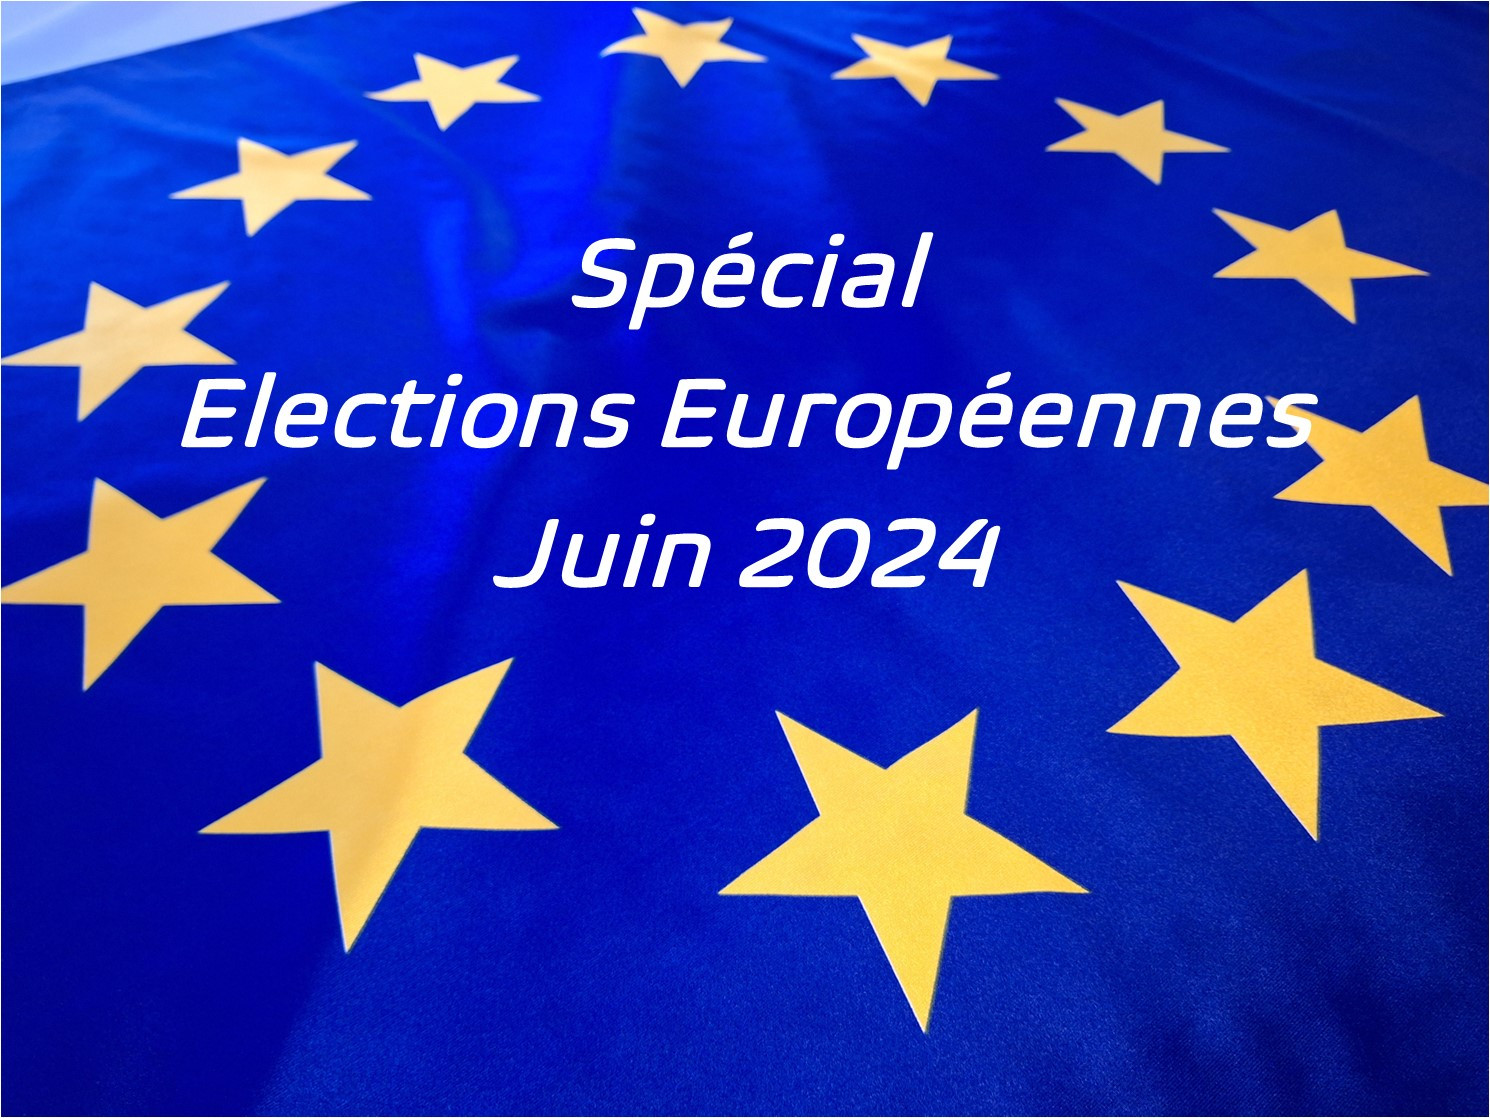 SPECIAL ELECTIONS EUROPEENNES